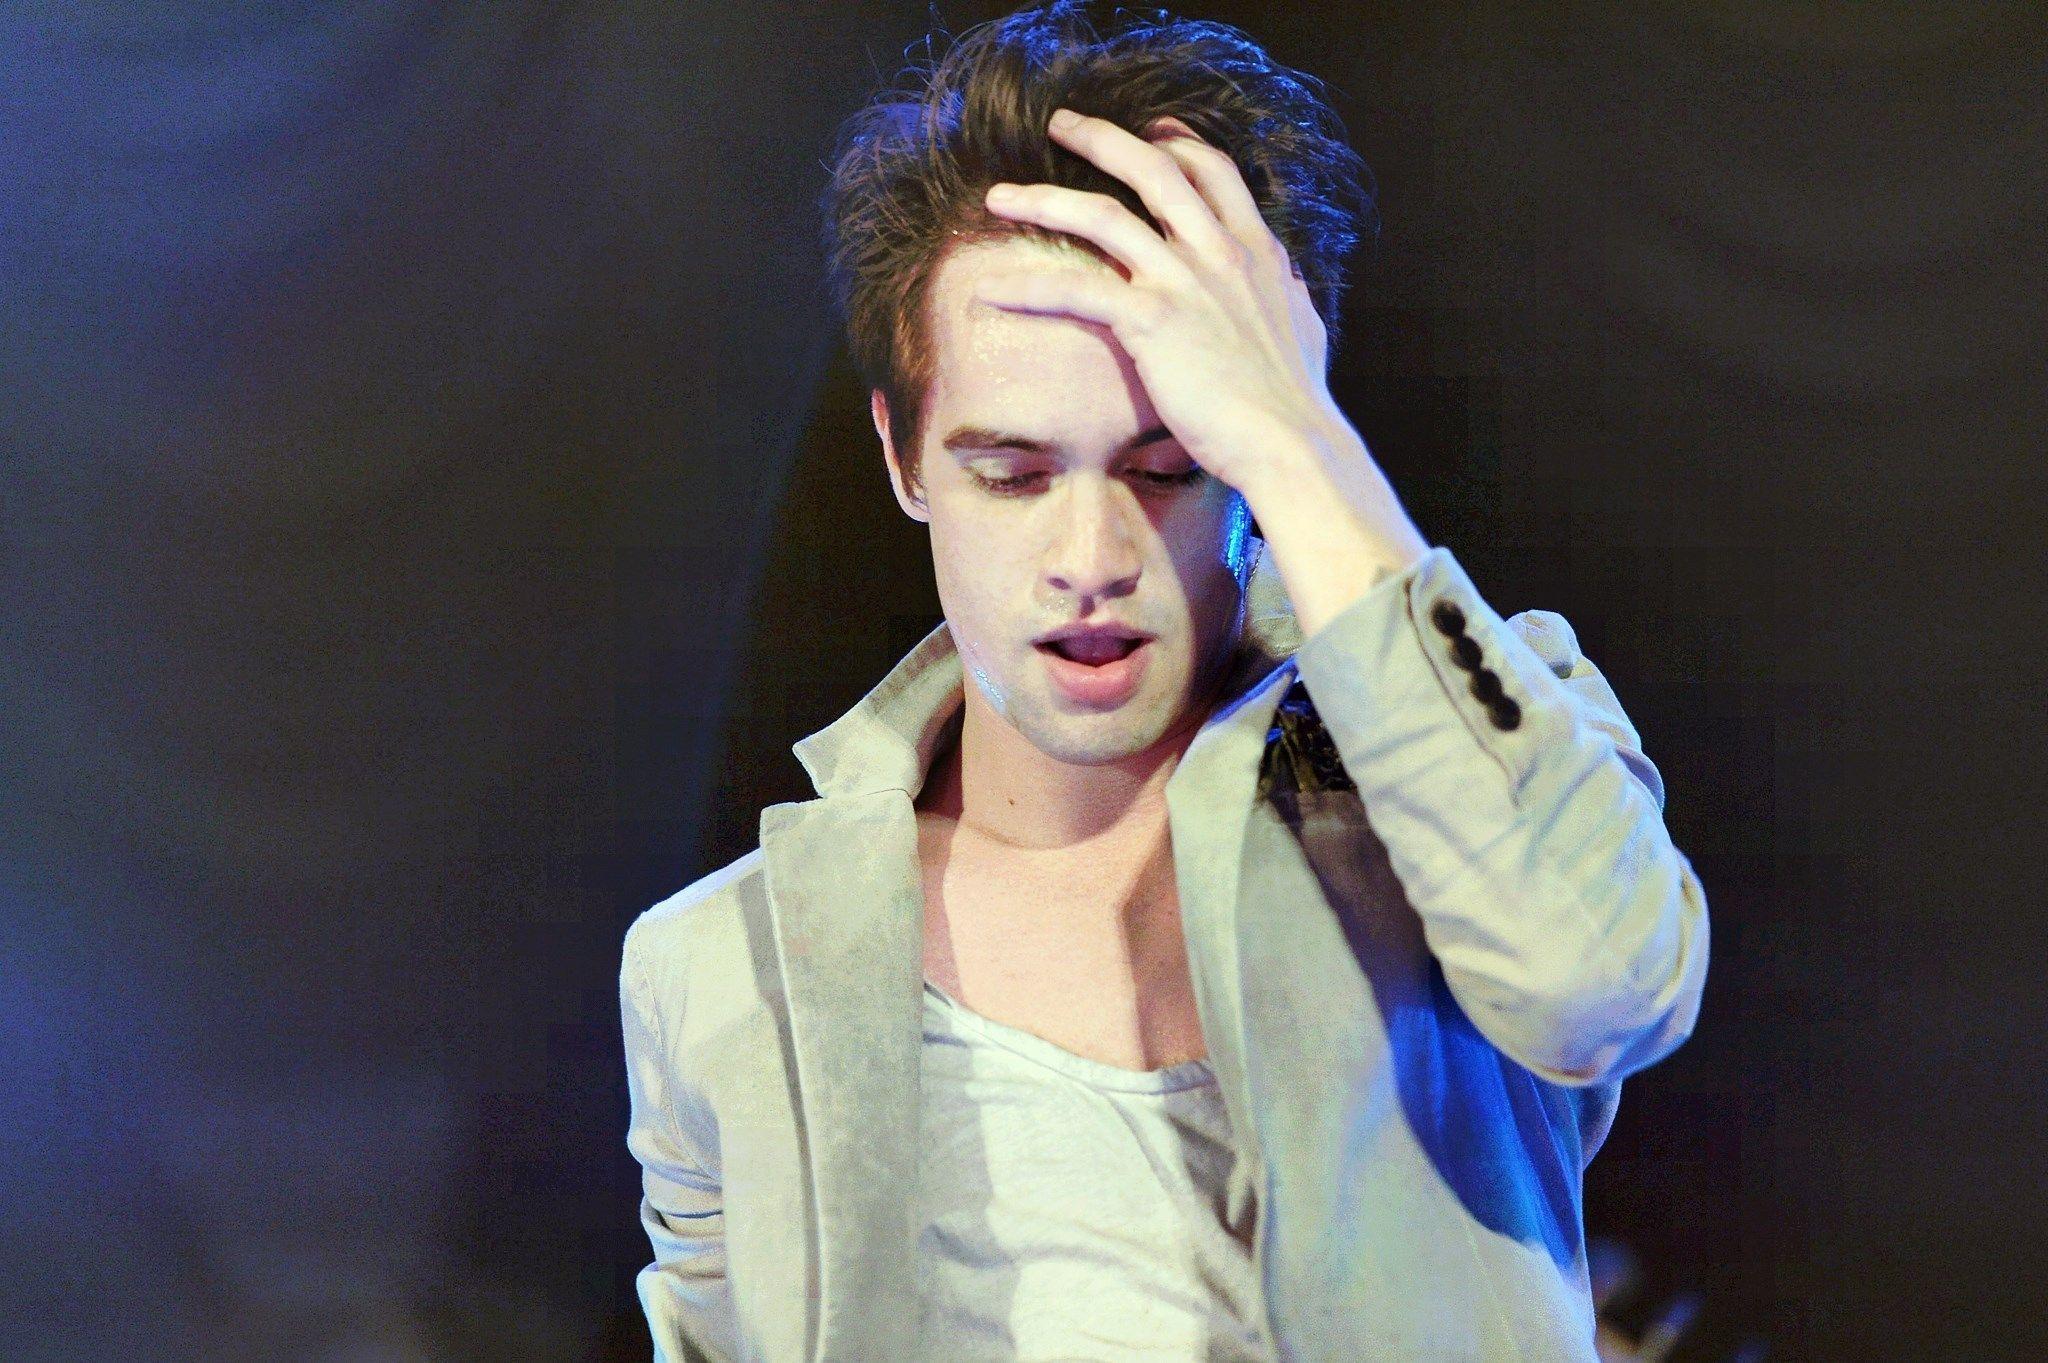 Brendon Urie Background